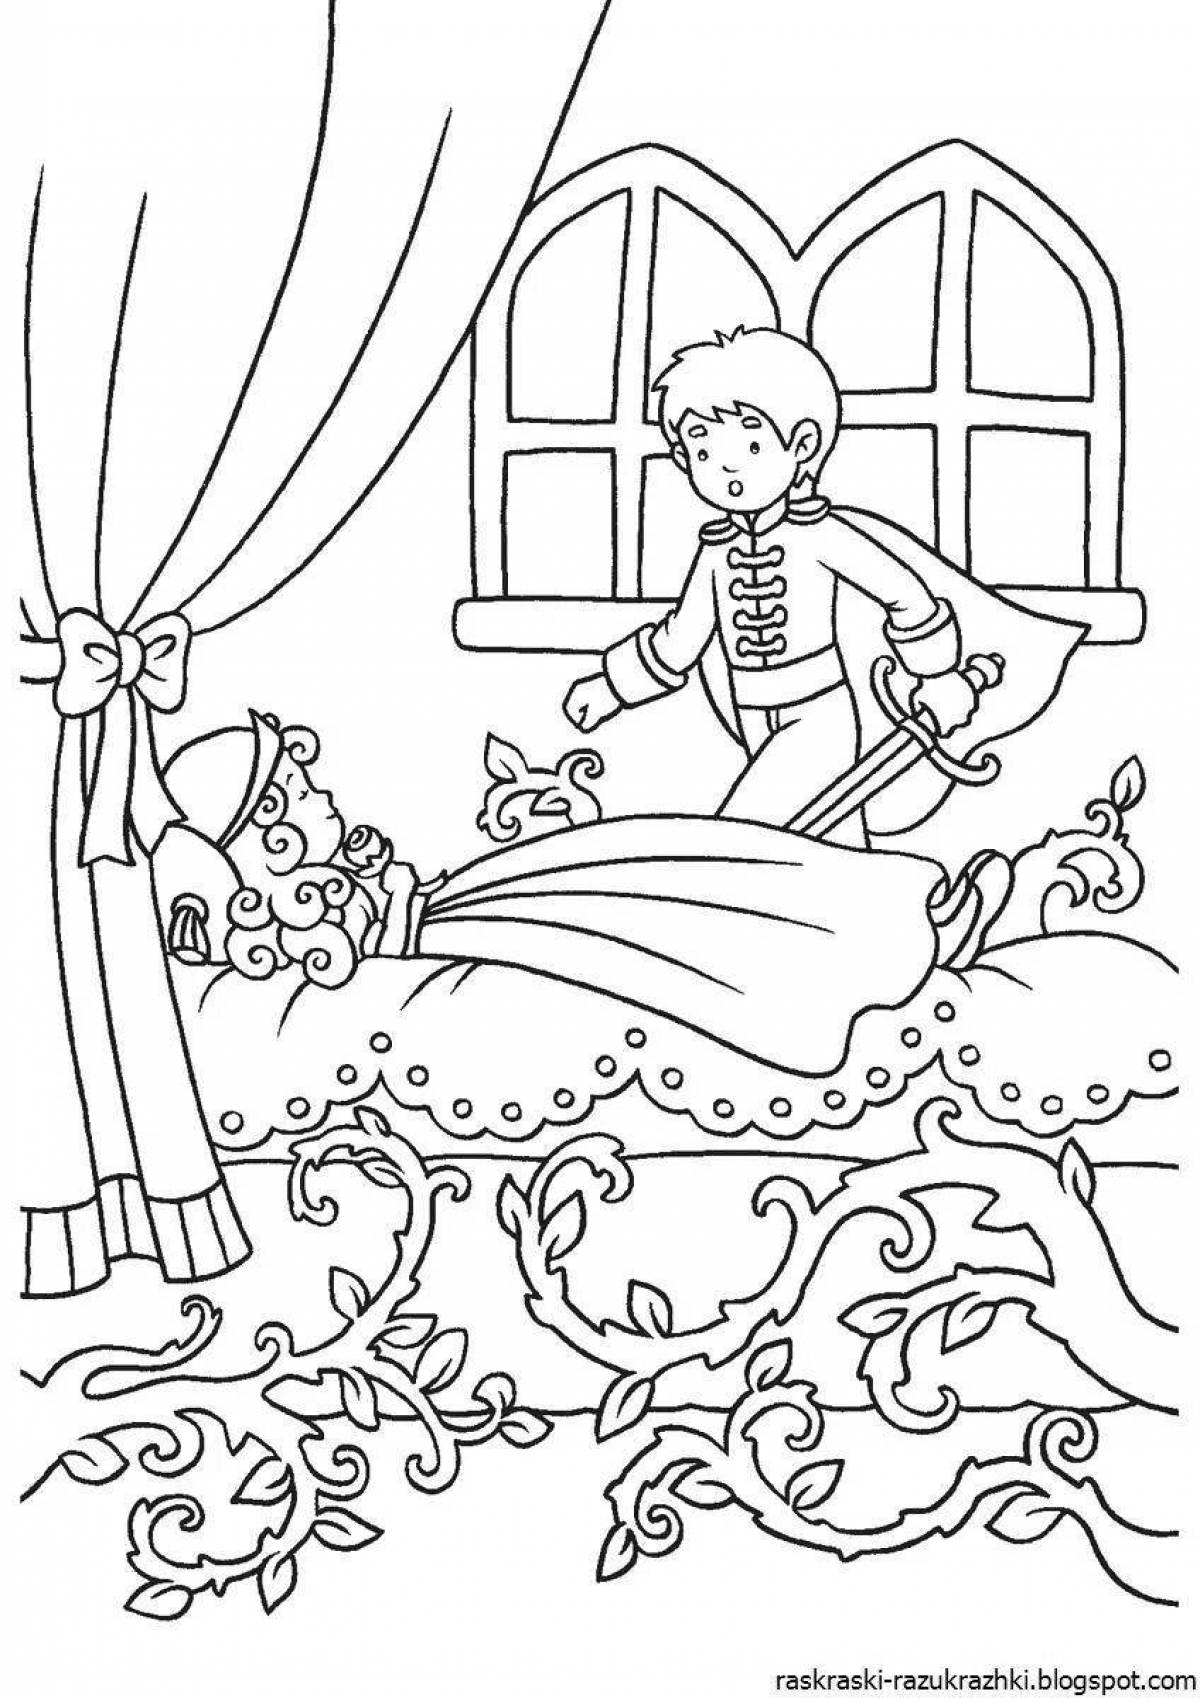 Majestic coloring pages heroes of fairy tales